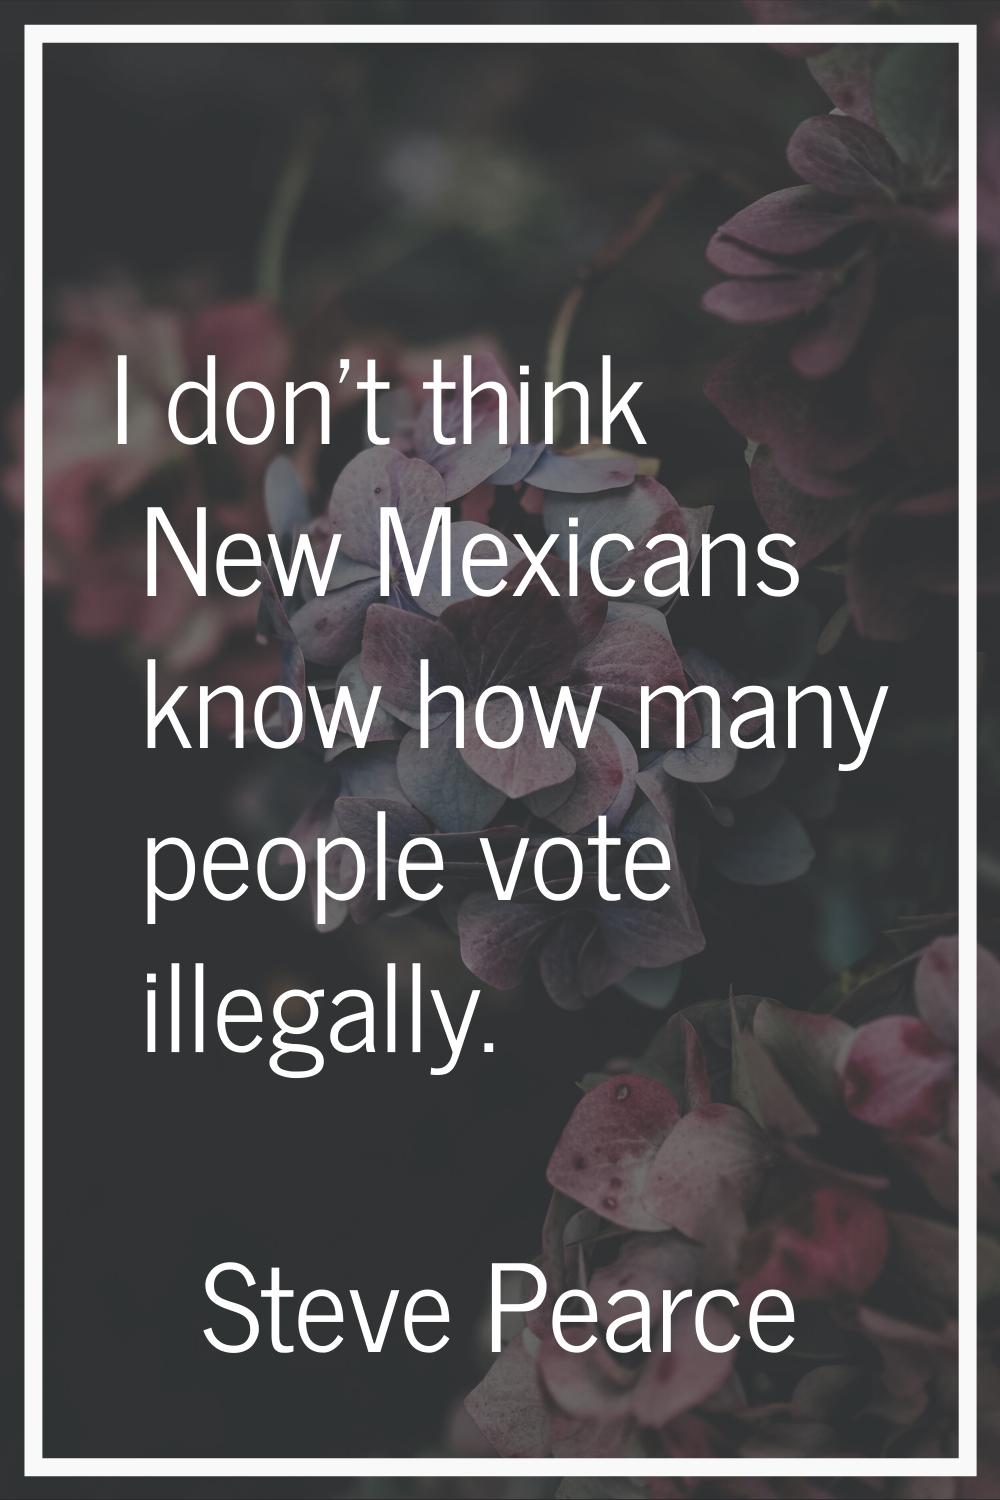 I don't think New Mexicans know how many people vote illegally.